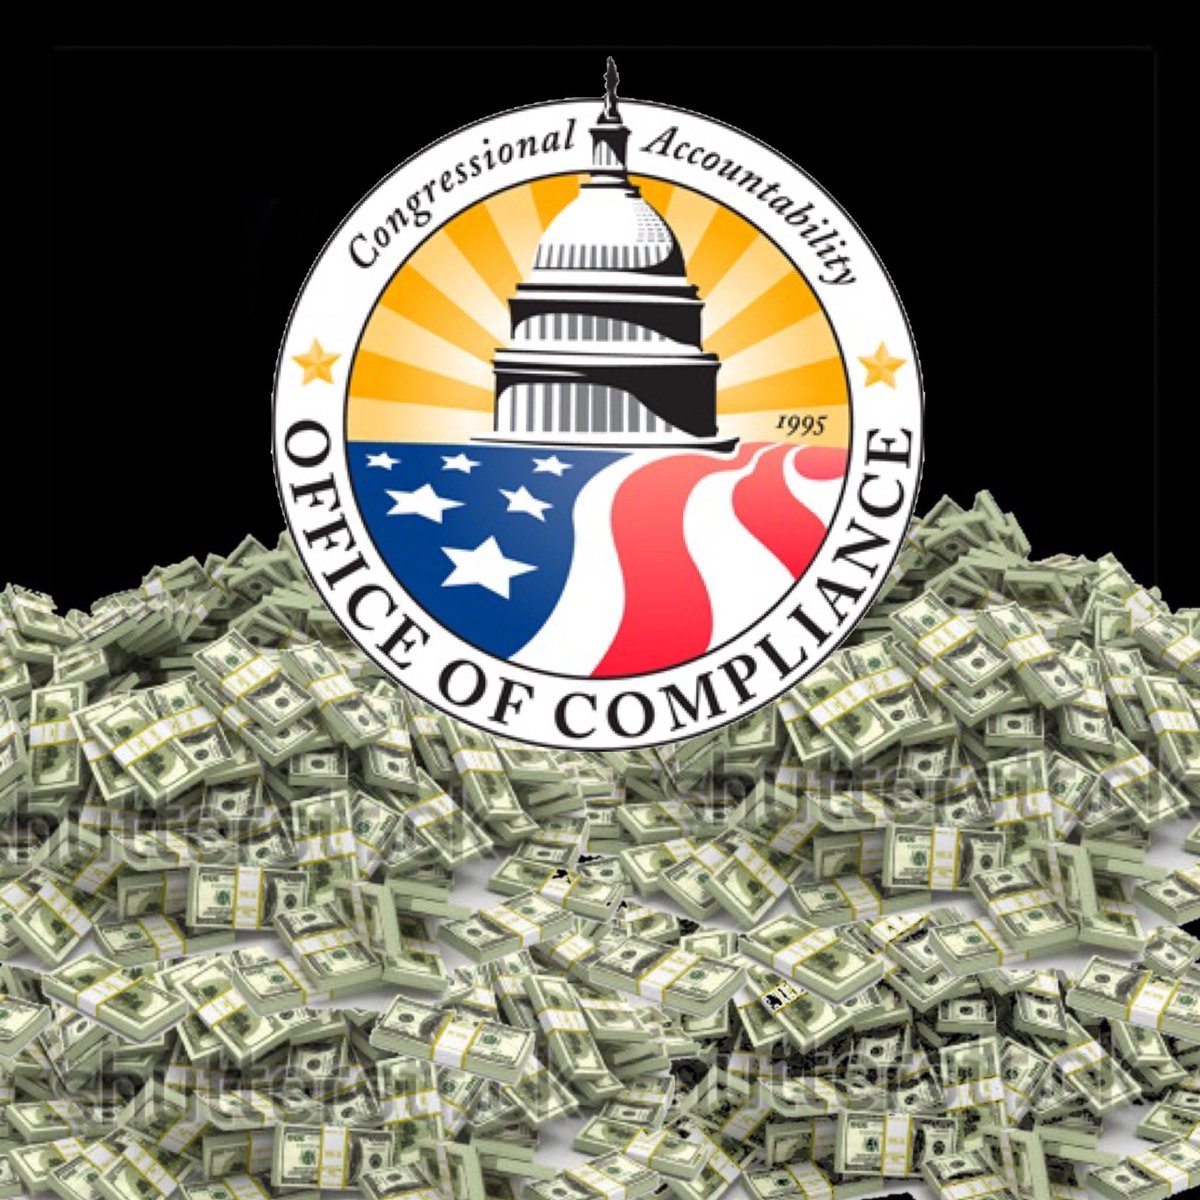 The Federal Office of Compliance has paid out $17 million, of taxpayer money, to 248 accusers of sexual misconduct by members of Congress (Hush $$$). With President Trump on trial for allegedly paying “Hush Money” to a porn actress based on the word of a convicted lying ex-con,